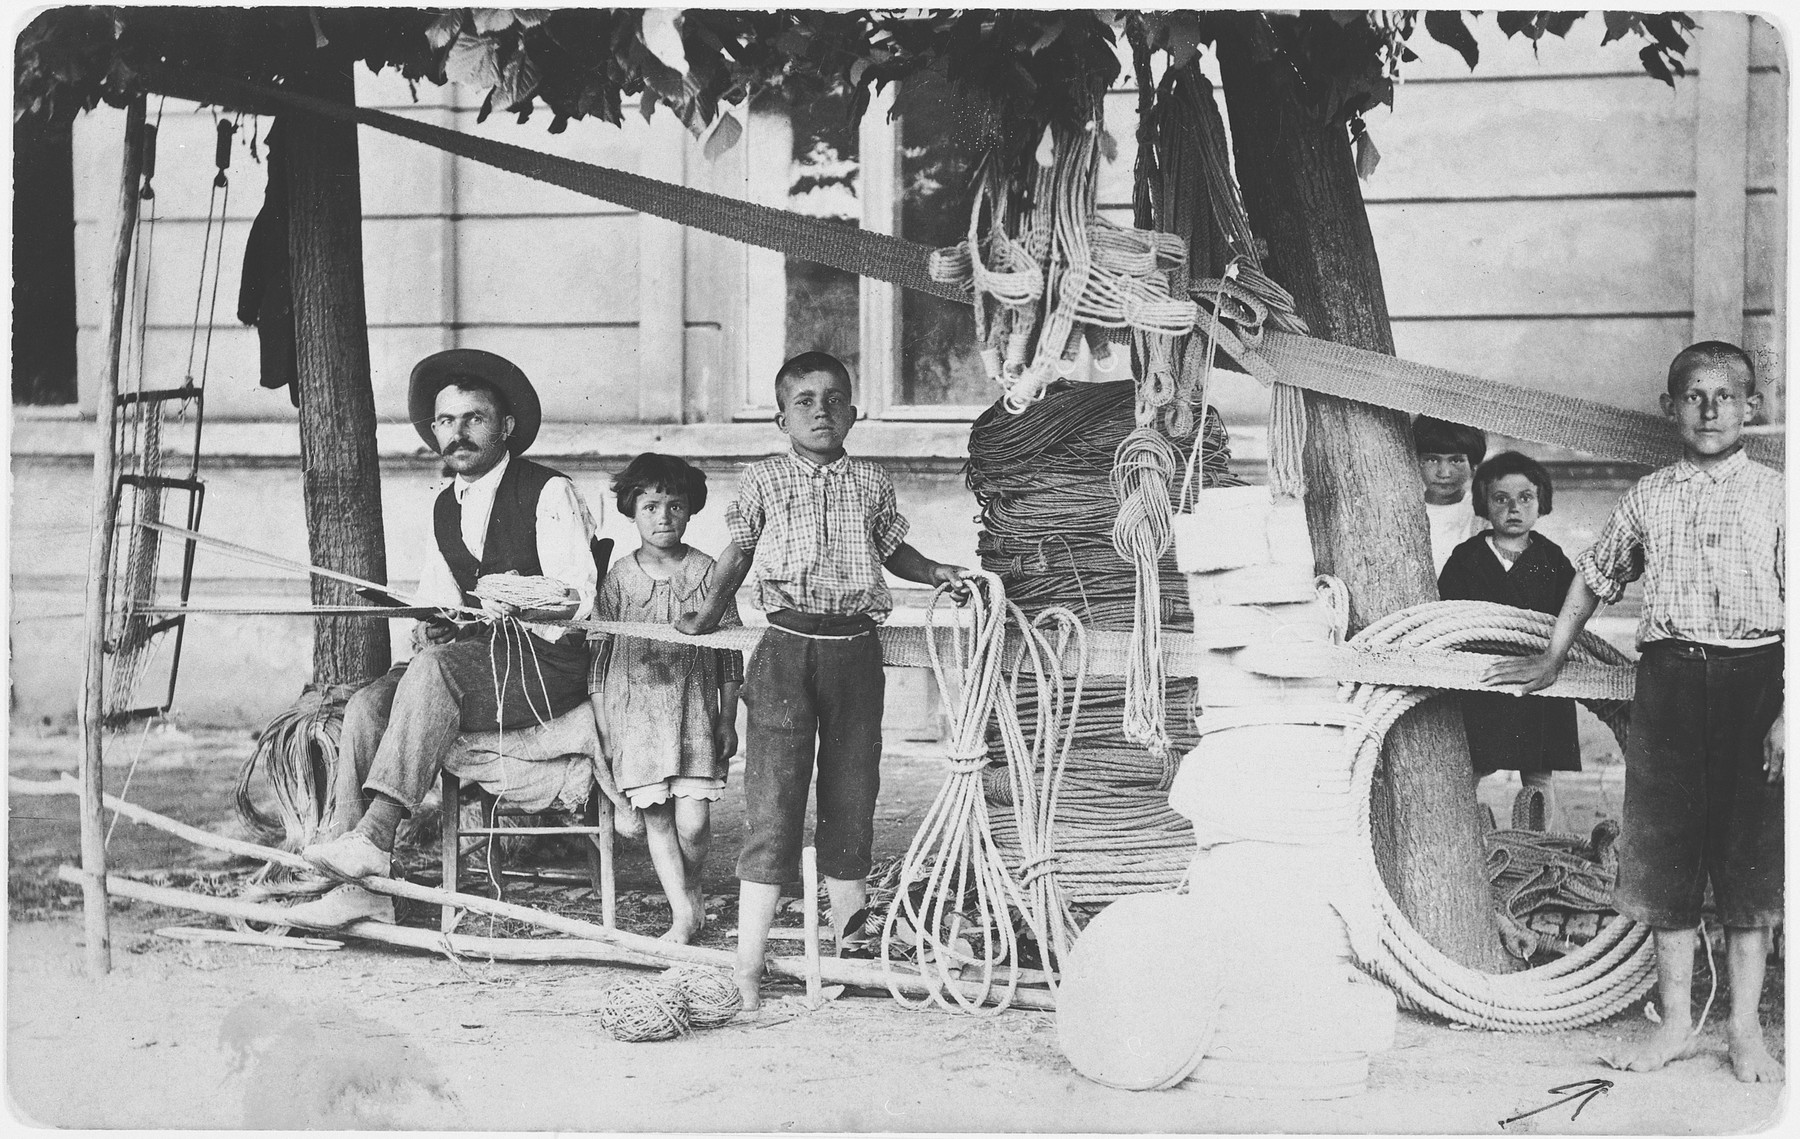 Moshe Lowy apprentices as a rope maker in the workshop of Mikhailo Radosavljevich.